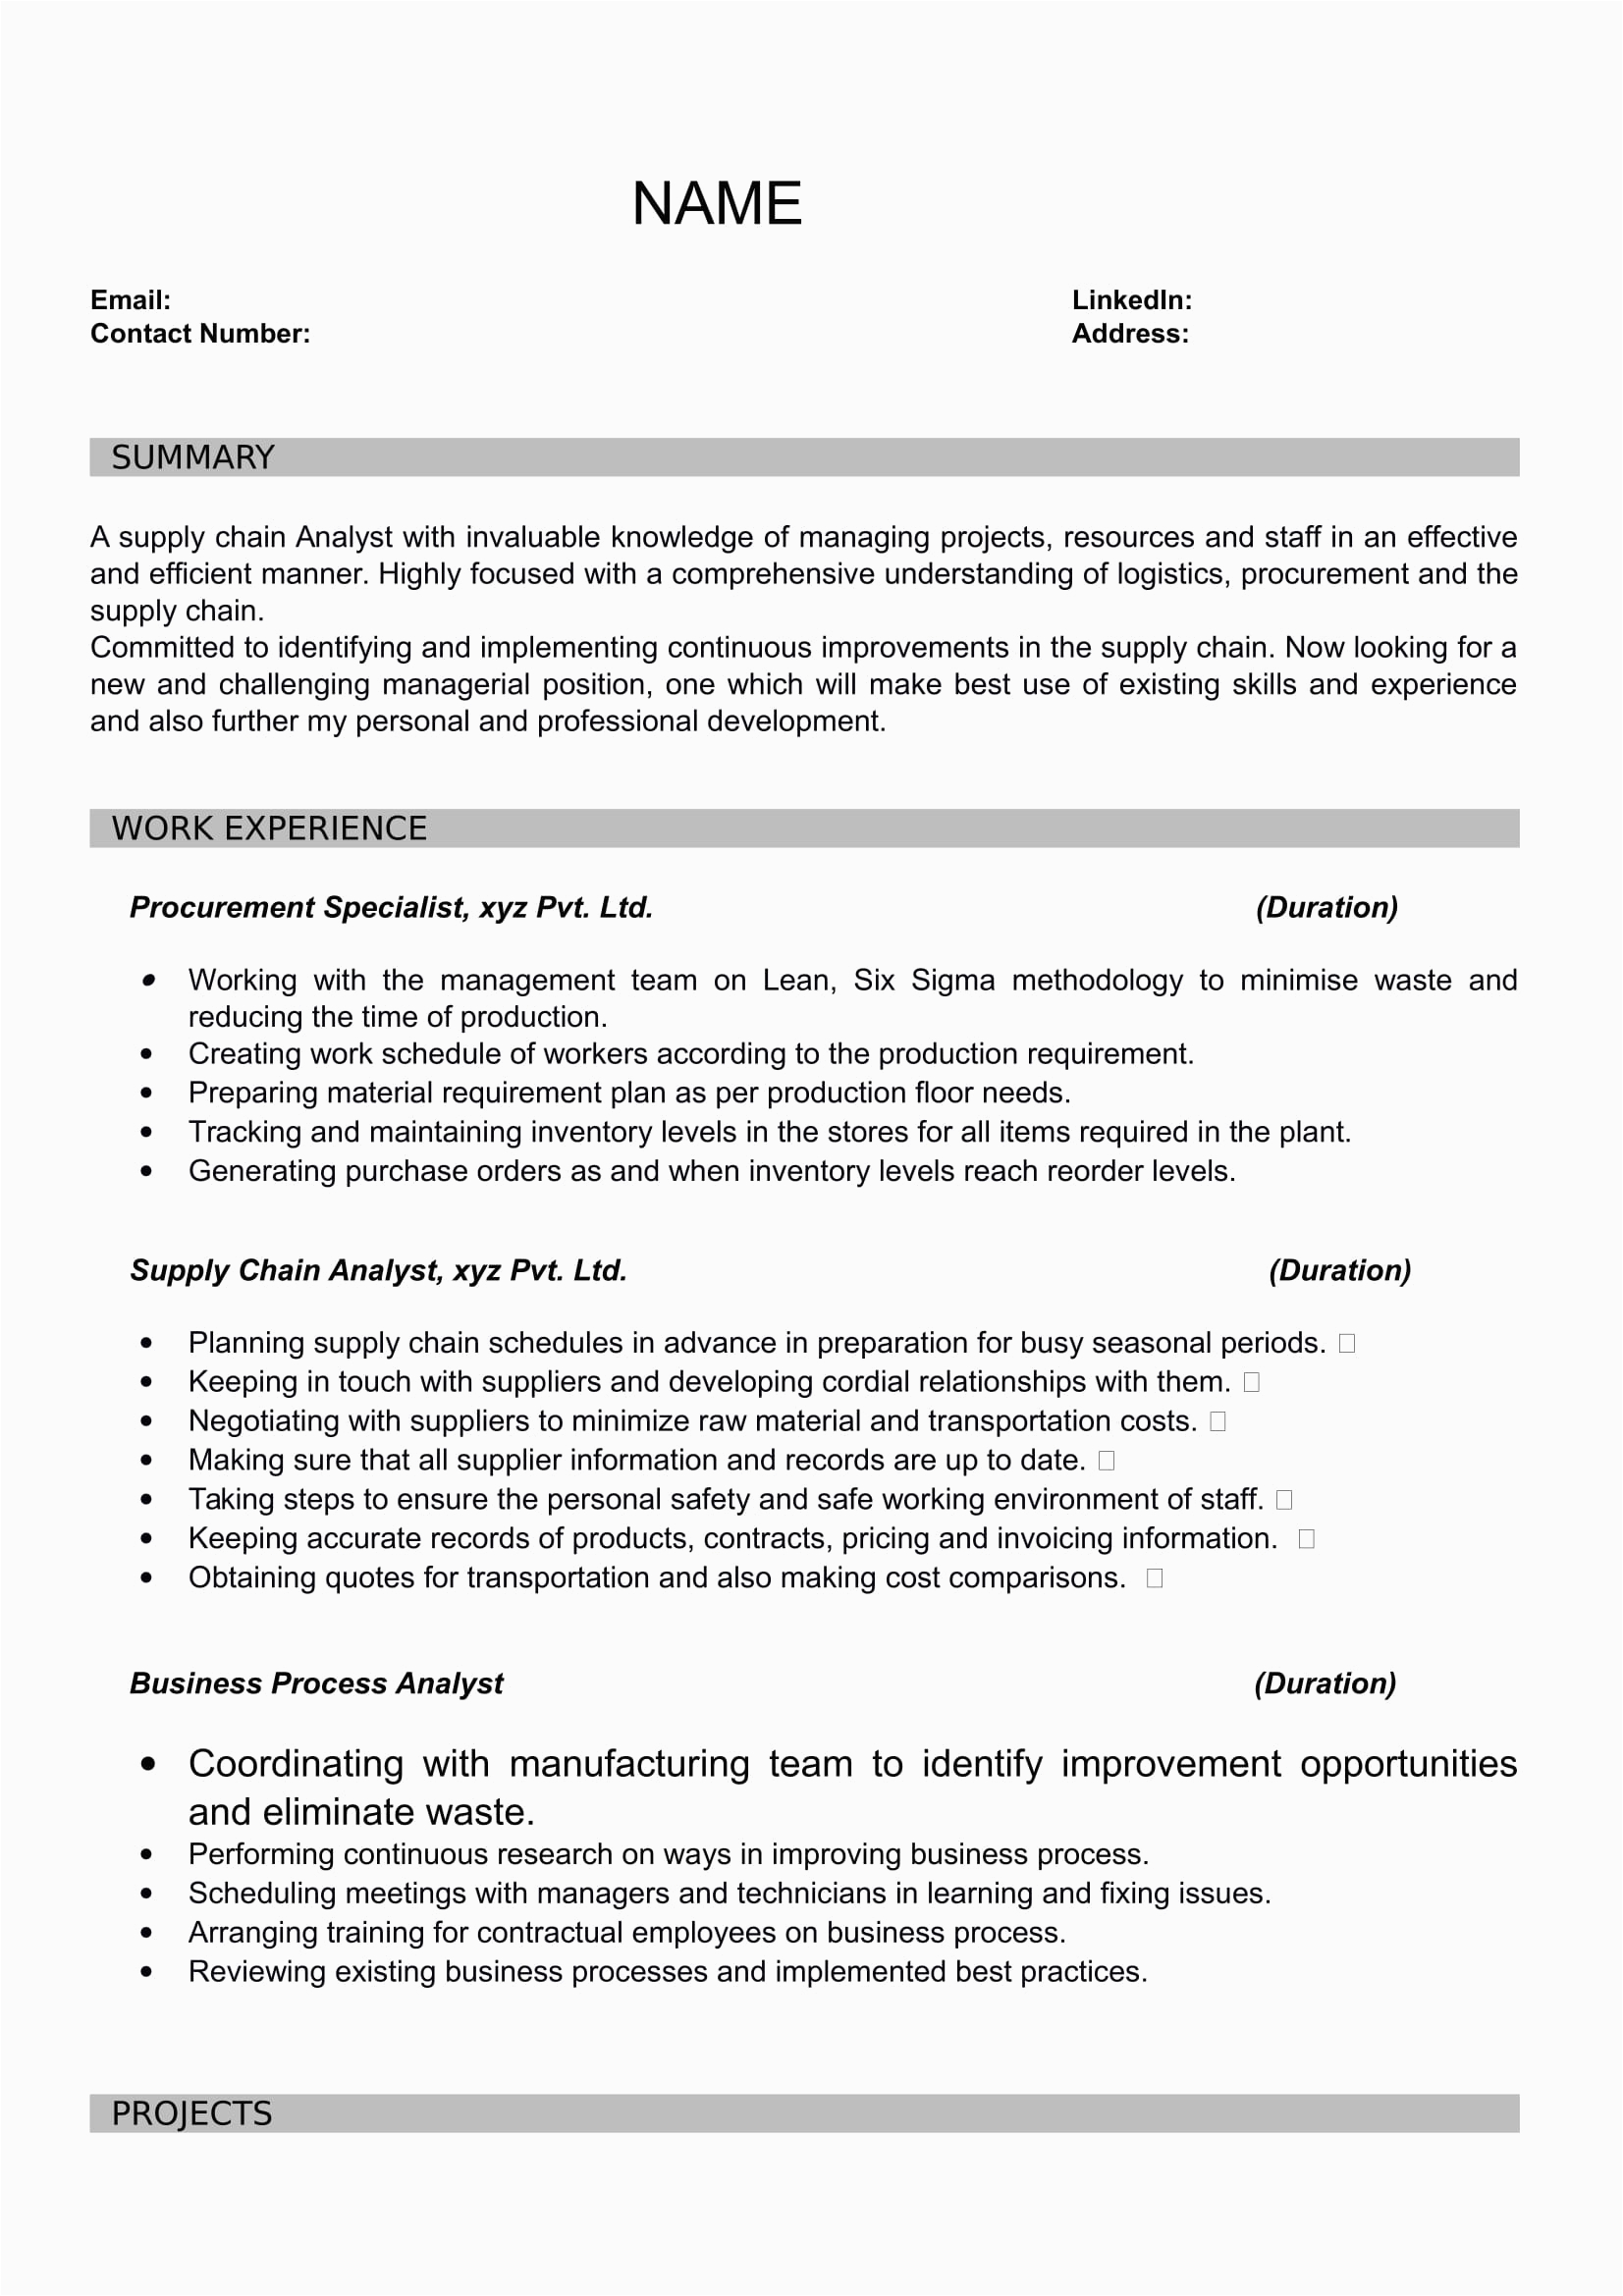 Resume Headline for Mba Freshers Sample Resume Templates for Mba Freshers Download Free